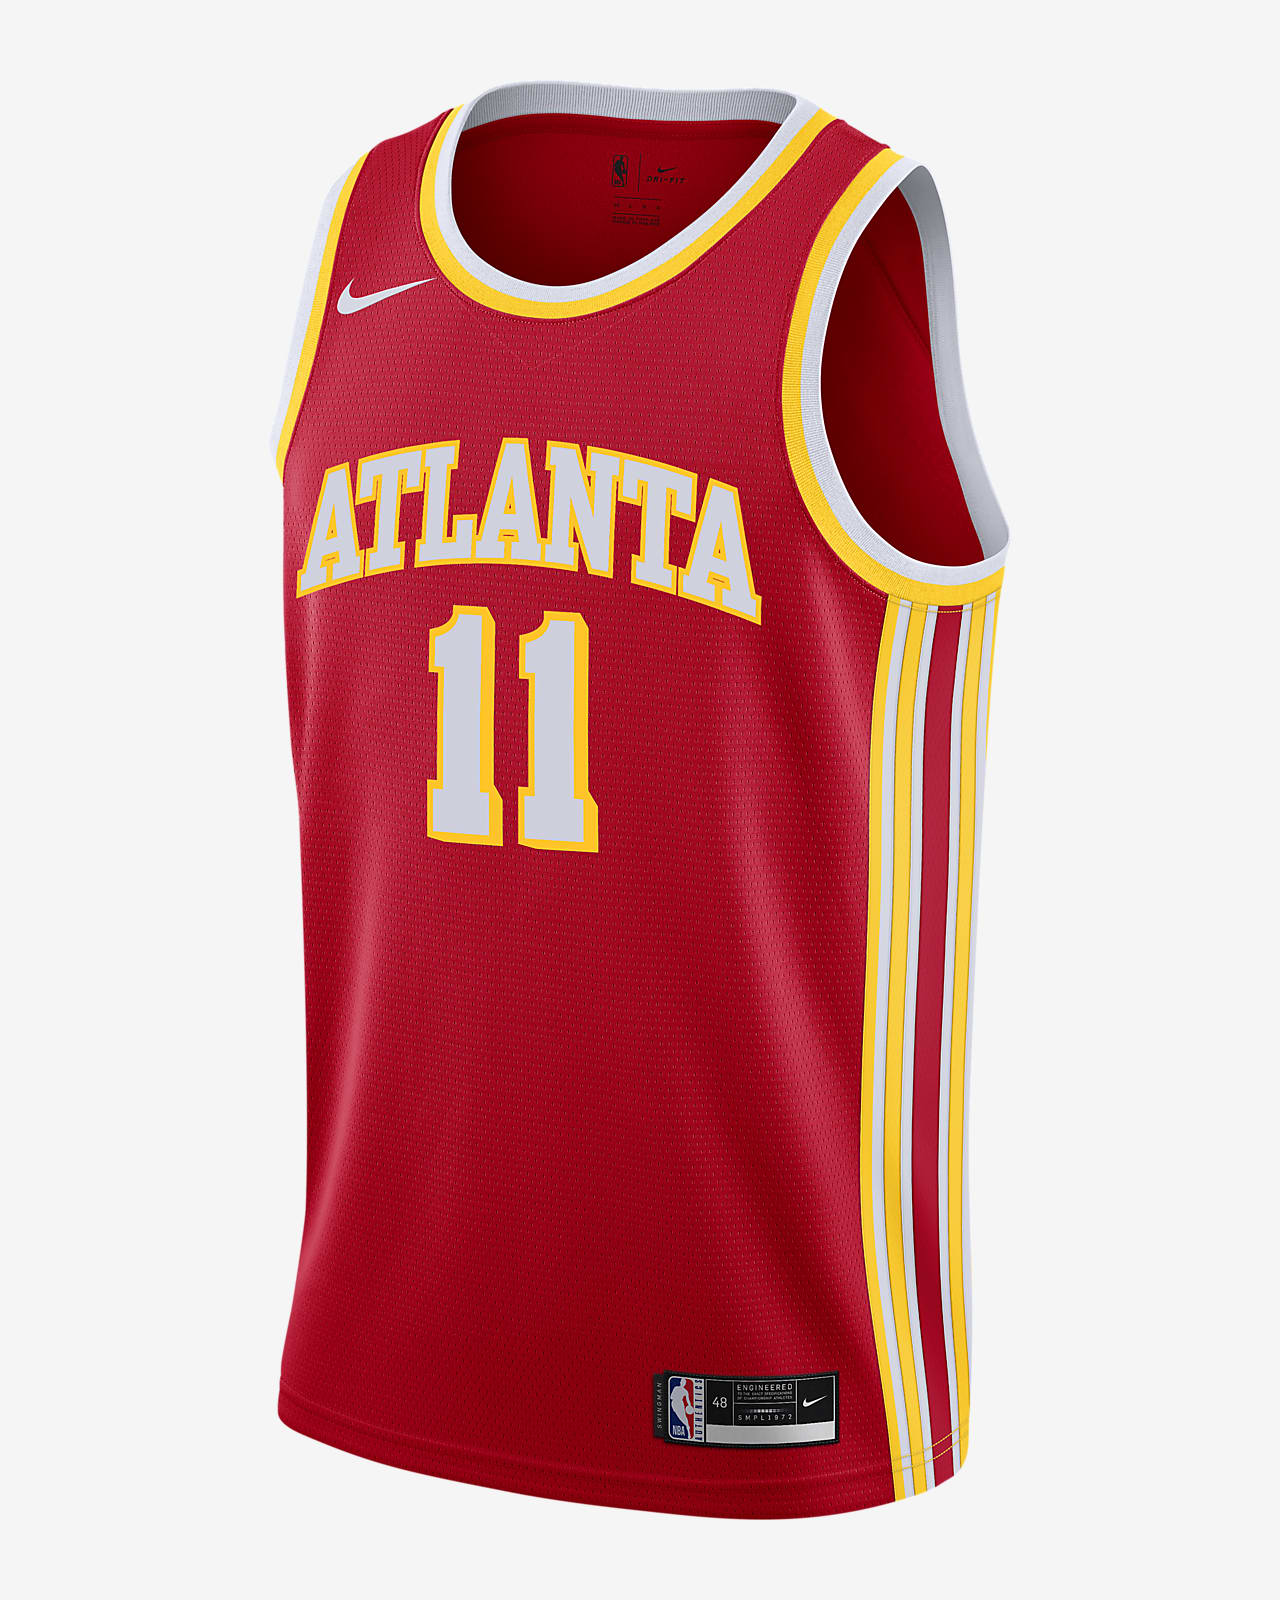 trae young jersey nike